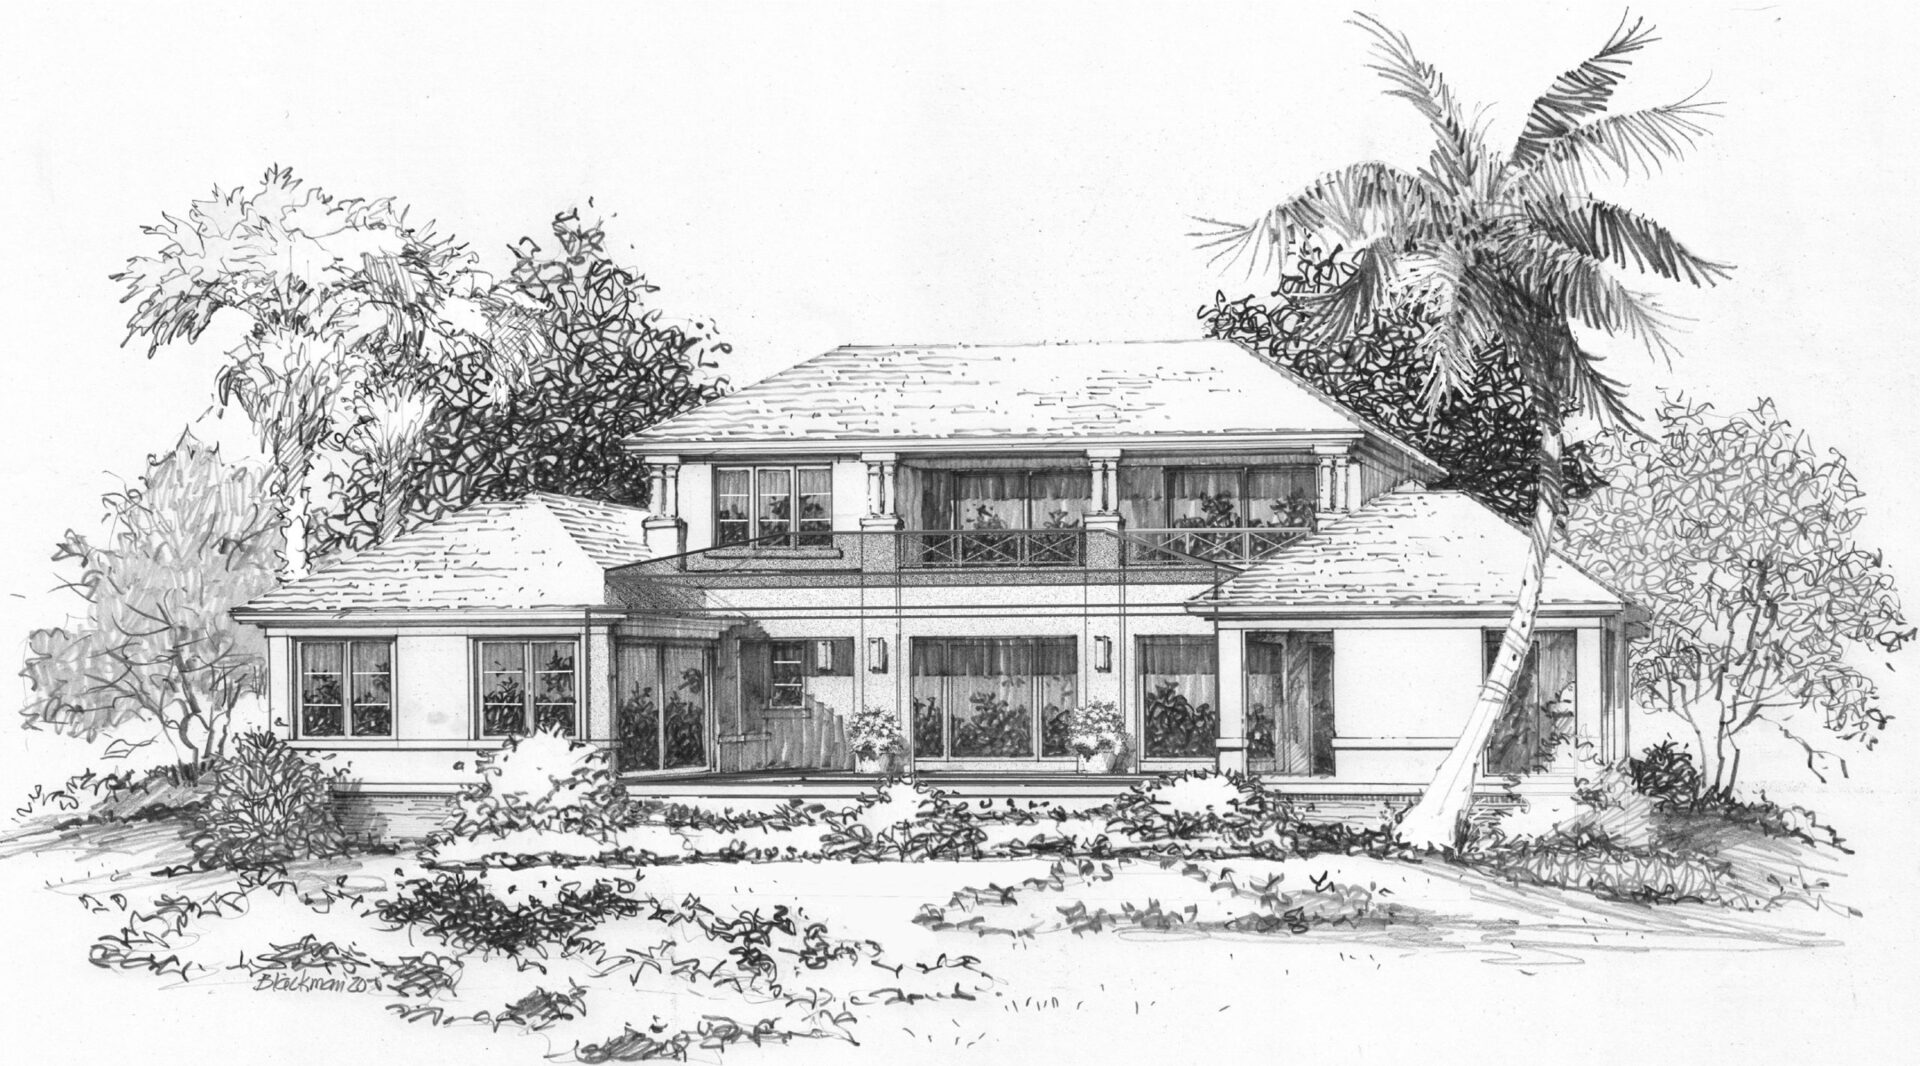 A drawing of the front of a house